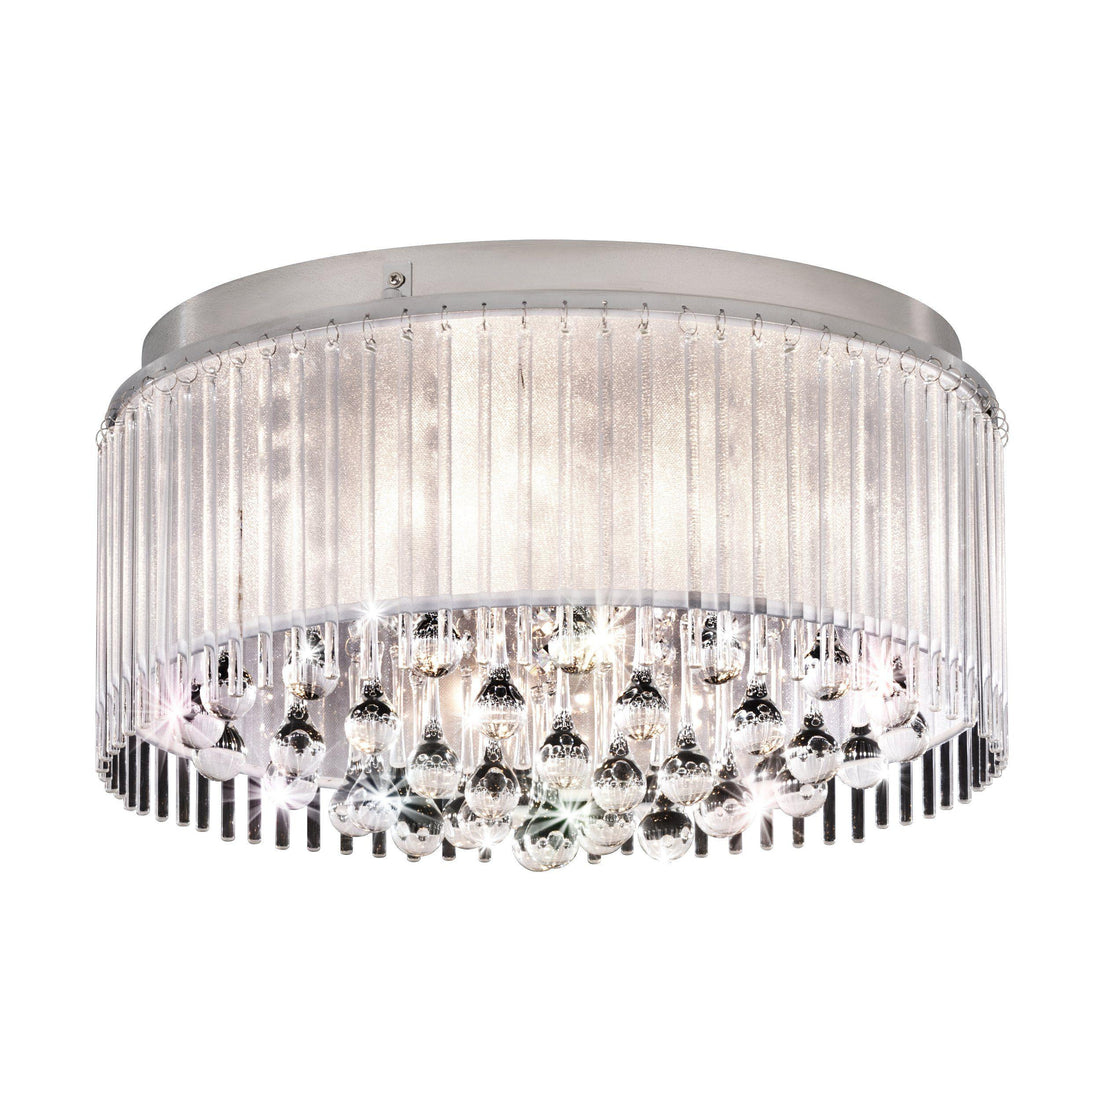 MONTESILVANO ceiling light by The Light Library